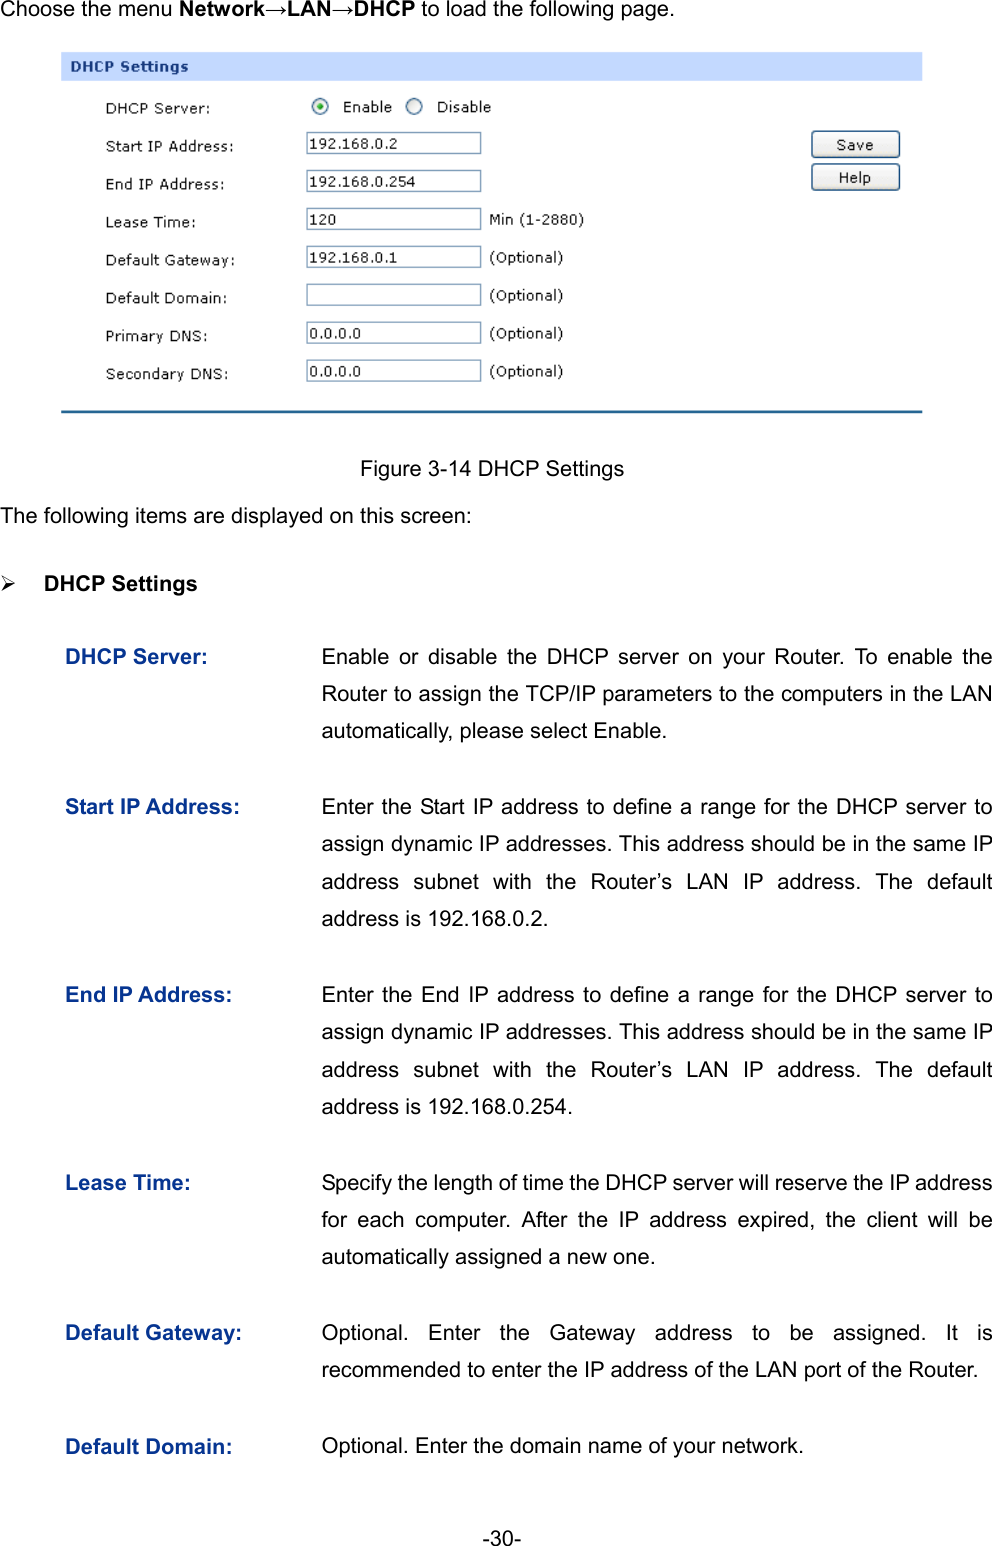  -30- Choose the menu Network→LAN→DHCP to load the following page.  Figure 3-14 DHCP Settings   The following items are displayed on this screen: ¾ DHCP Settings   DHCP Server:  Enable or disable the DHCP server on your Router. To enable the Router to assign the TCP/IP parameters to the computers in the LAN automatically, please select Enable.   Start IP Address:  Enter the Start IP address to define a range for the DHCP server to assign dynamic IP addresses. This address should be in the same IP address subnet with the Router’s LAN IP address. The default address is 192.168.0.2. End IP Address:  Enter the End IP address to define a range for the DHCP server to assign dynamic IP addresses. This address should be in the same IP address subnet with the Router’s LAN IP address. The default address is 192.168.0.254. Lease Time:  Specify the length of time the DHCP server will reserve the IP address for each computer. After the IP address expired, the client will be automatically assigned a new one. Default Gateway:  Optional. Enter the Gateway address to be assigned. It is recommended to enter the IP address of the LAN port of the Router. Default Domain:  Optional. Enter the domain name of your network. 